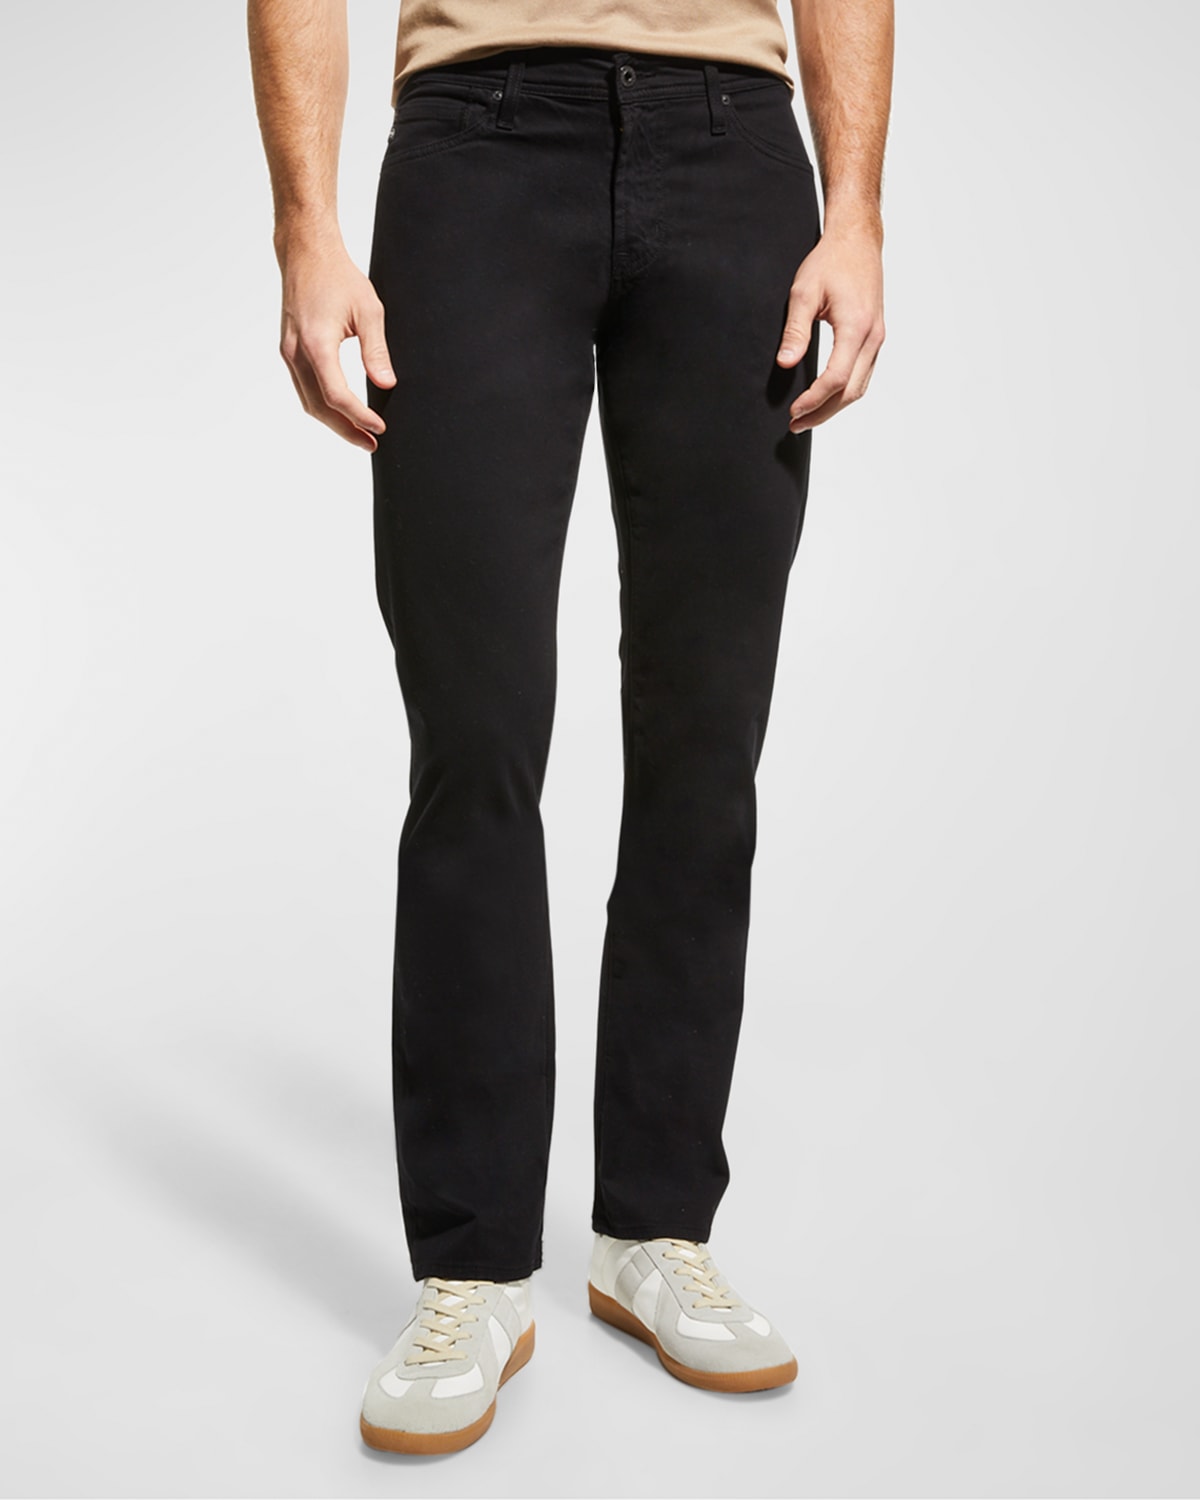 AG Adriano Goldschmied Graduate Sud Tailored Jeans